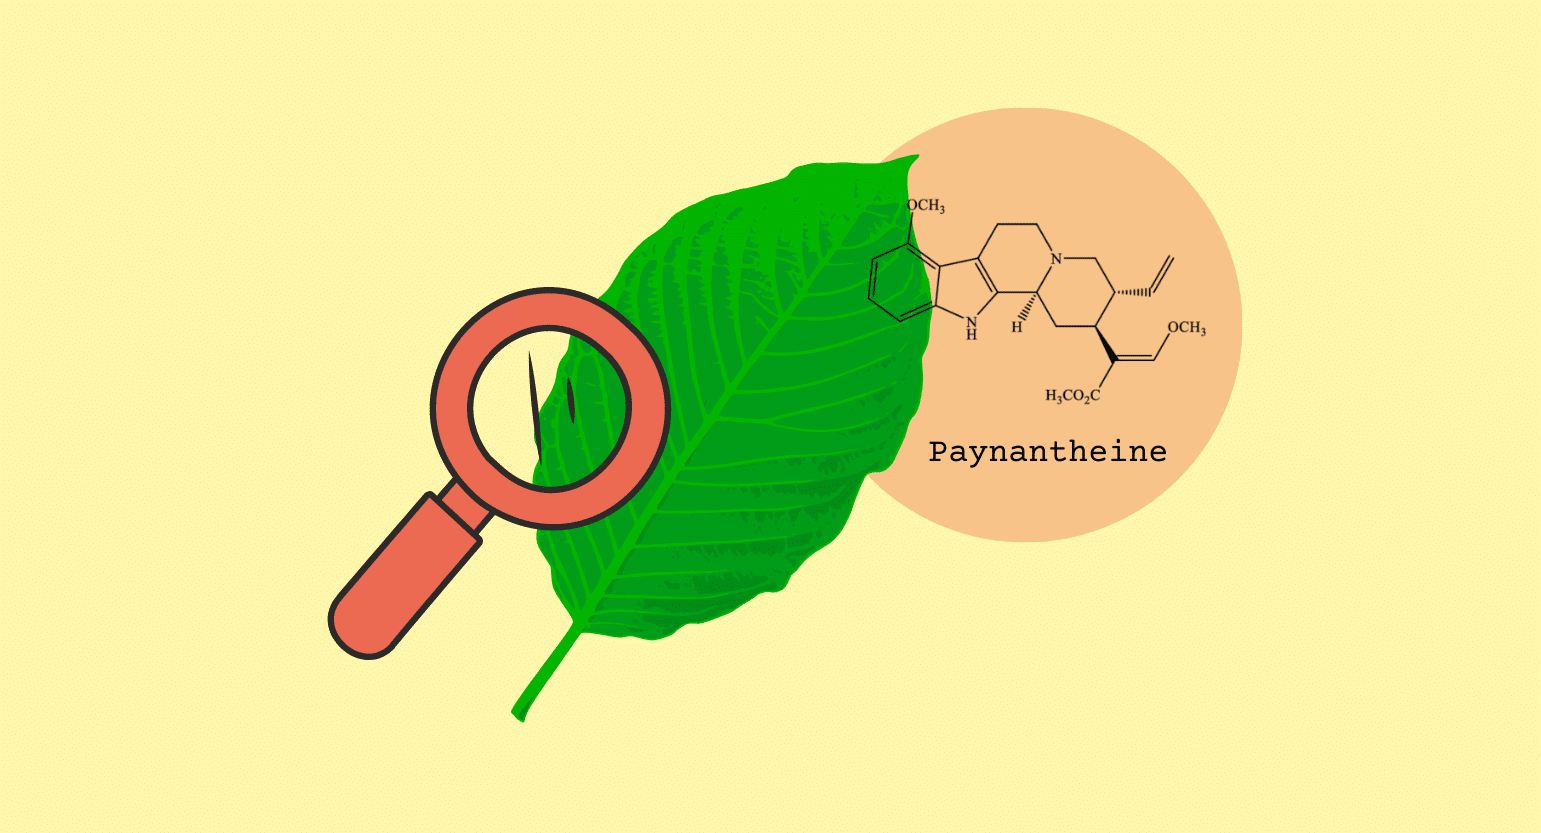 Paynantheine: Everything You Need to Know About This Potent Alkaloid